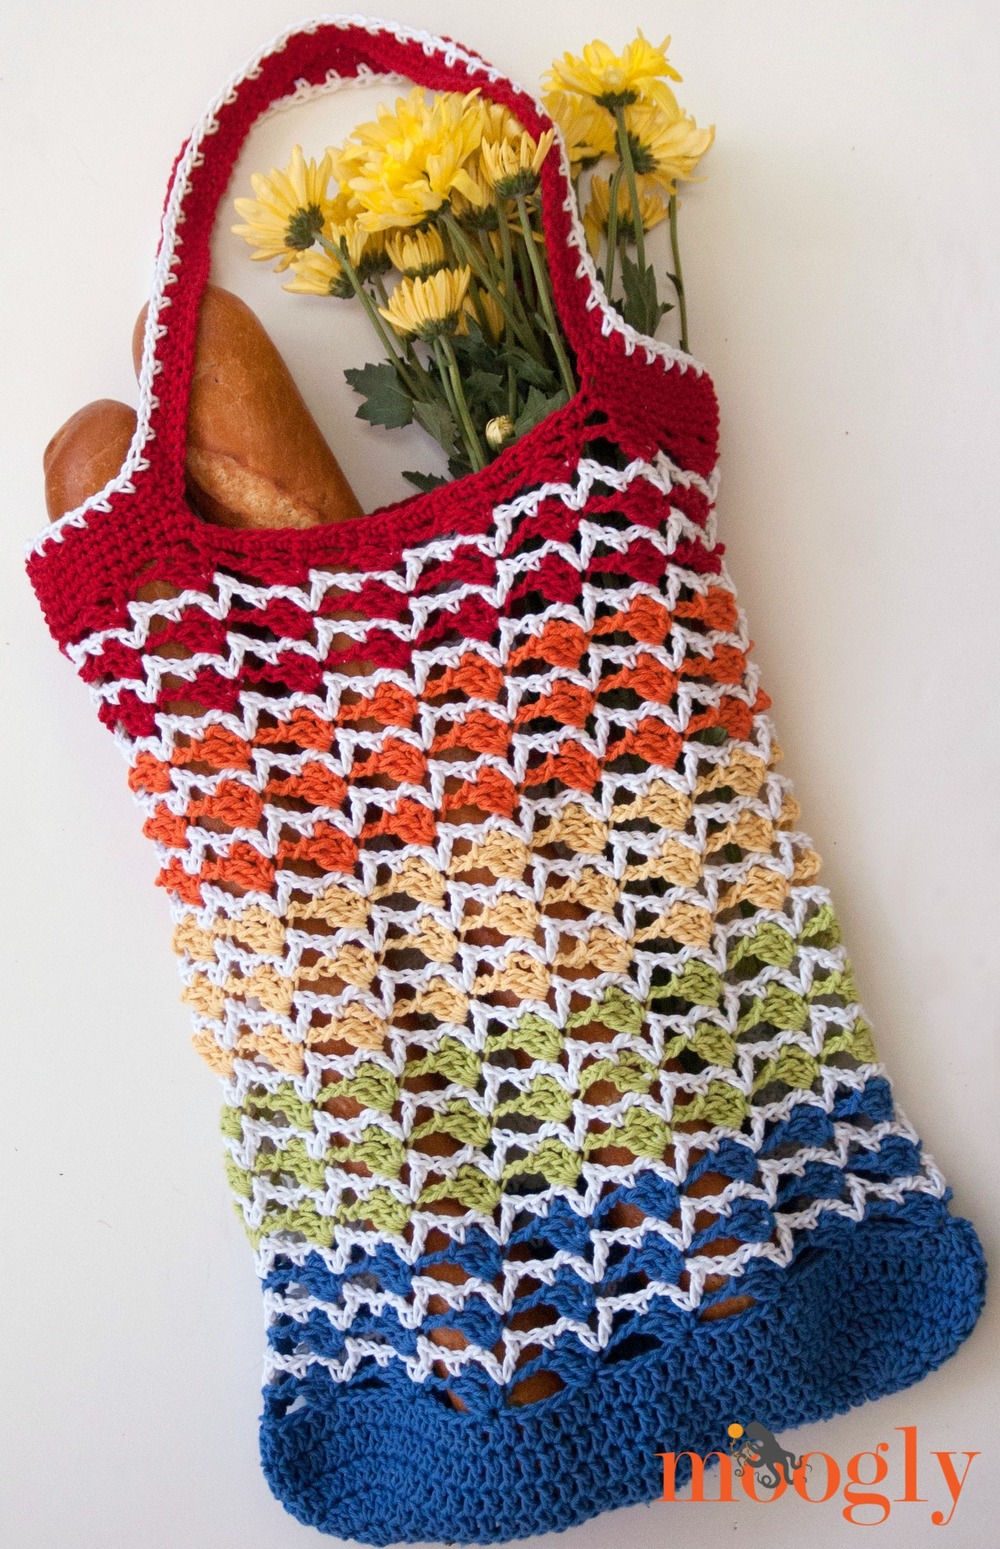 Ravelry: Wrapped Ombre Tote Bag pattern by Tamara Kelly